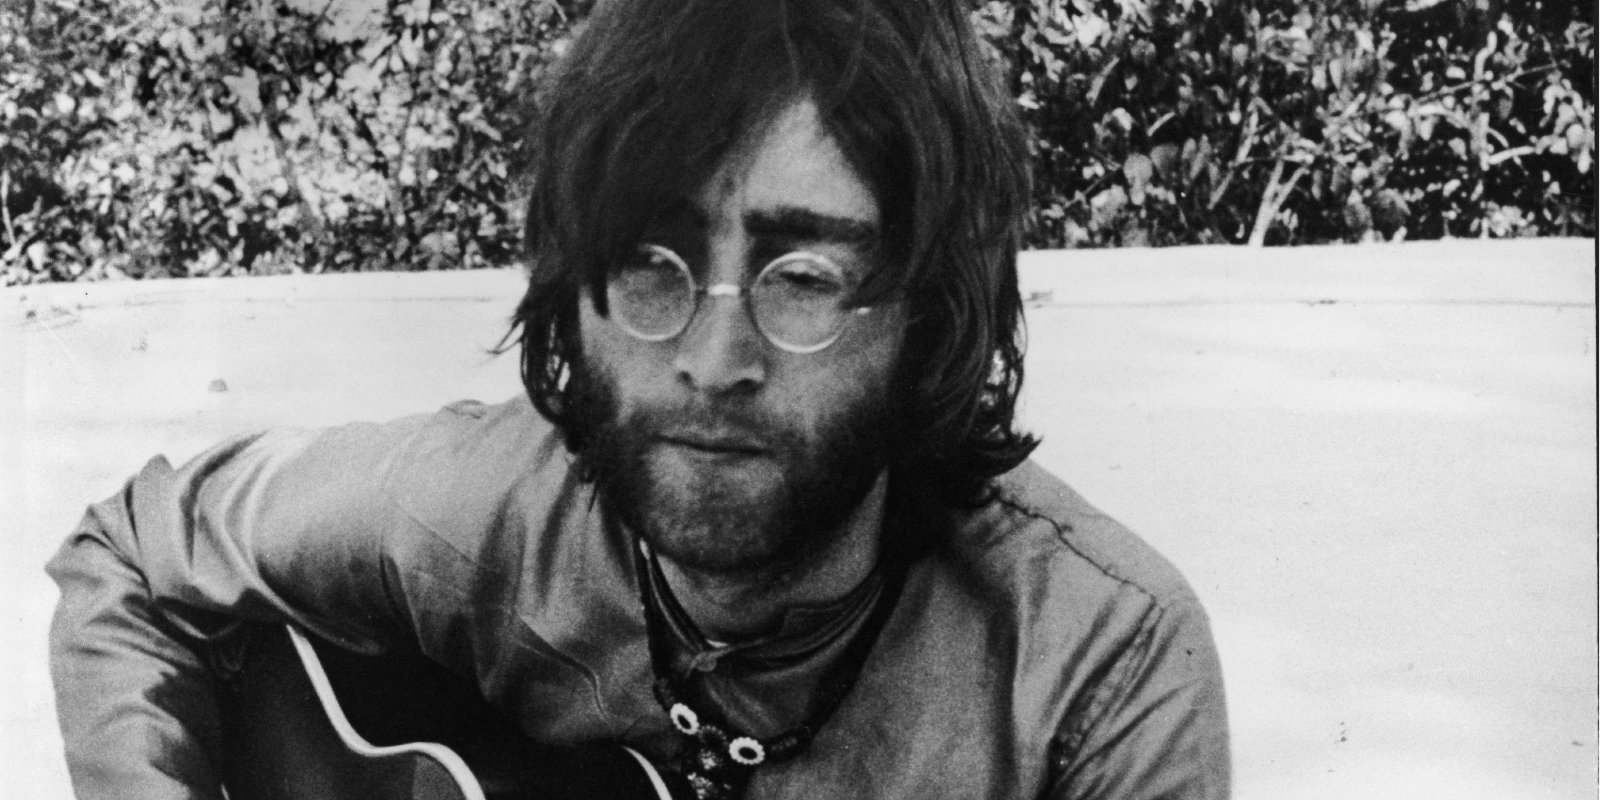 John Lennon playing the guitar in Rishikesh, India where he was following a transcendental course with the rest of The Beatles members. 